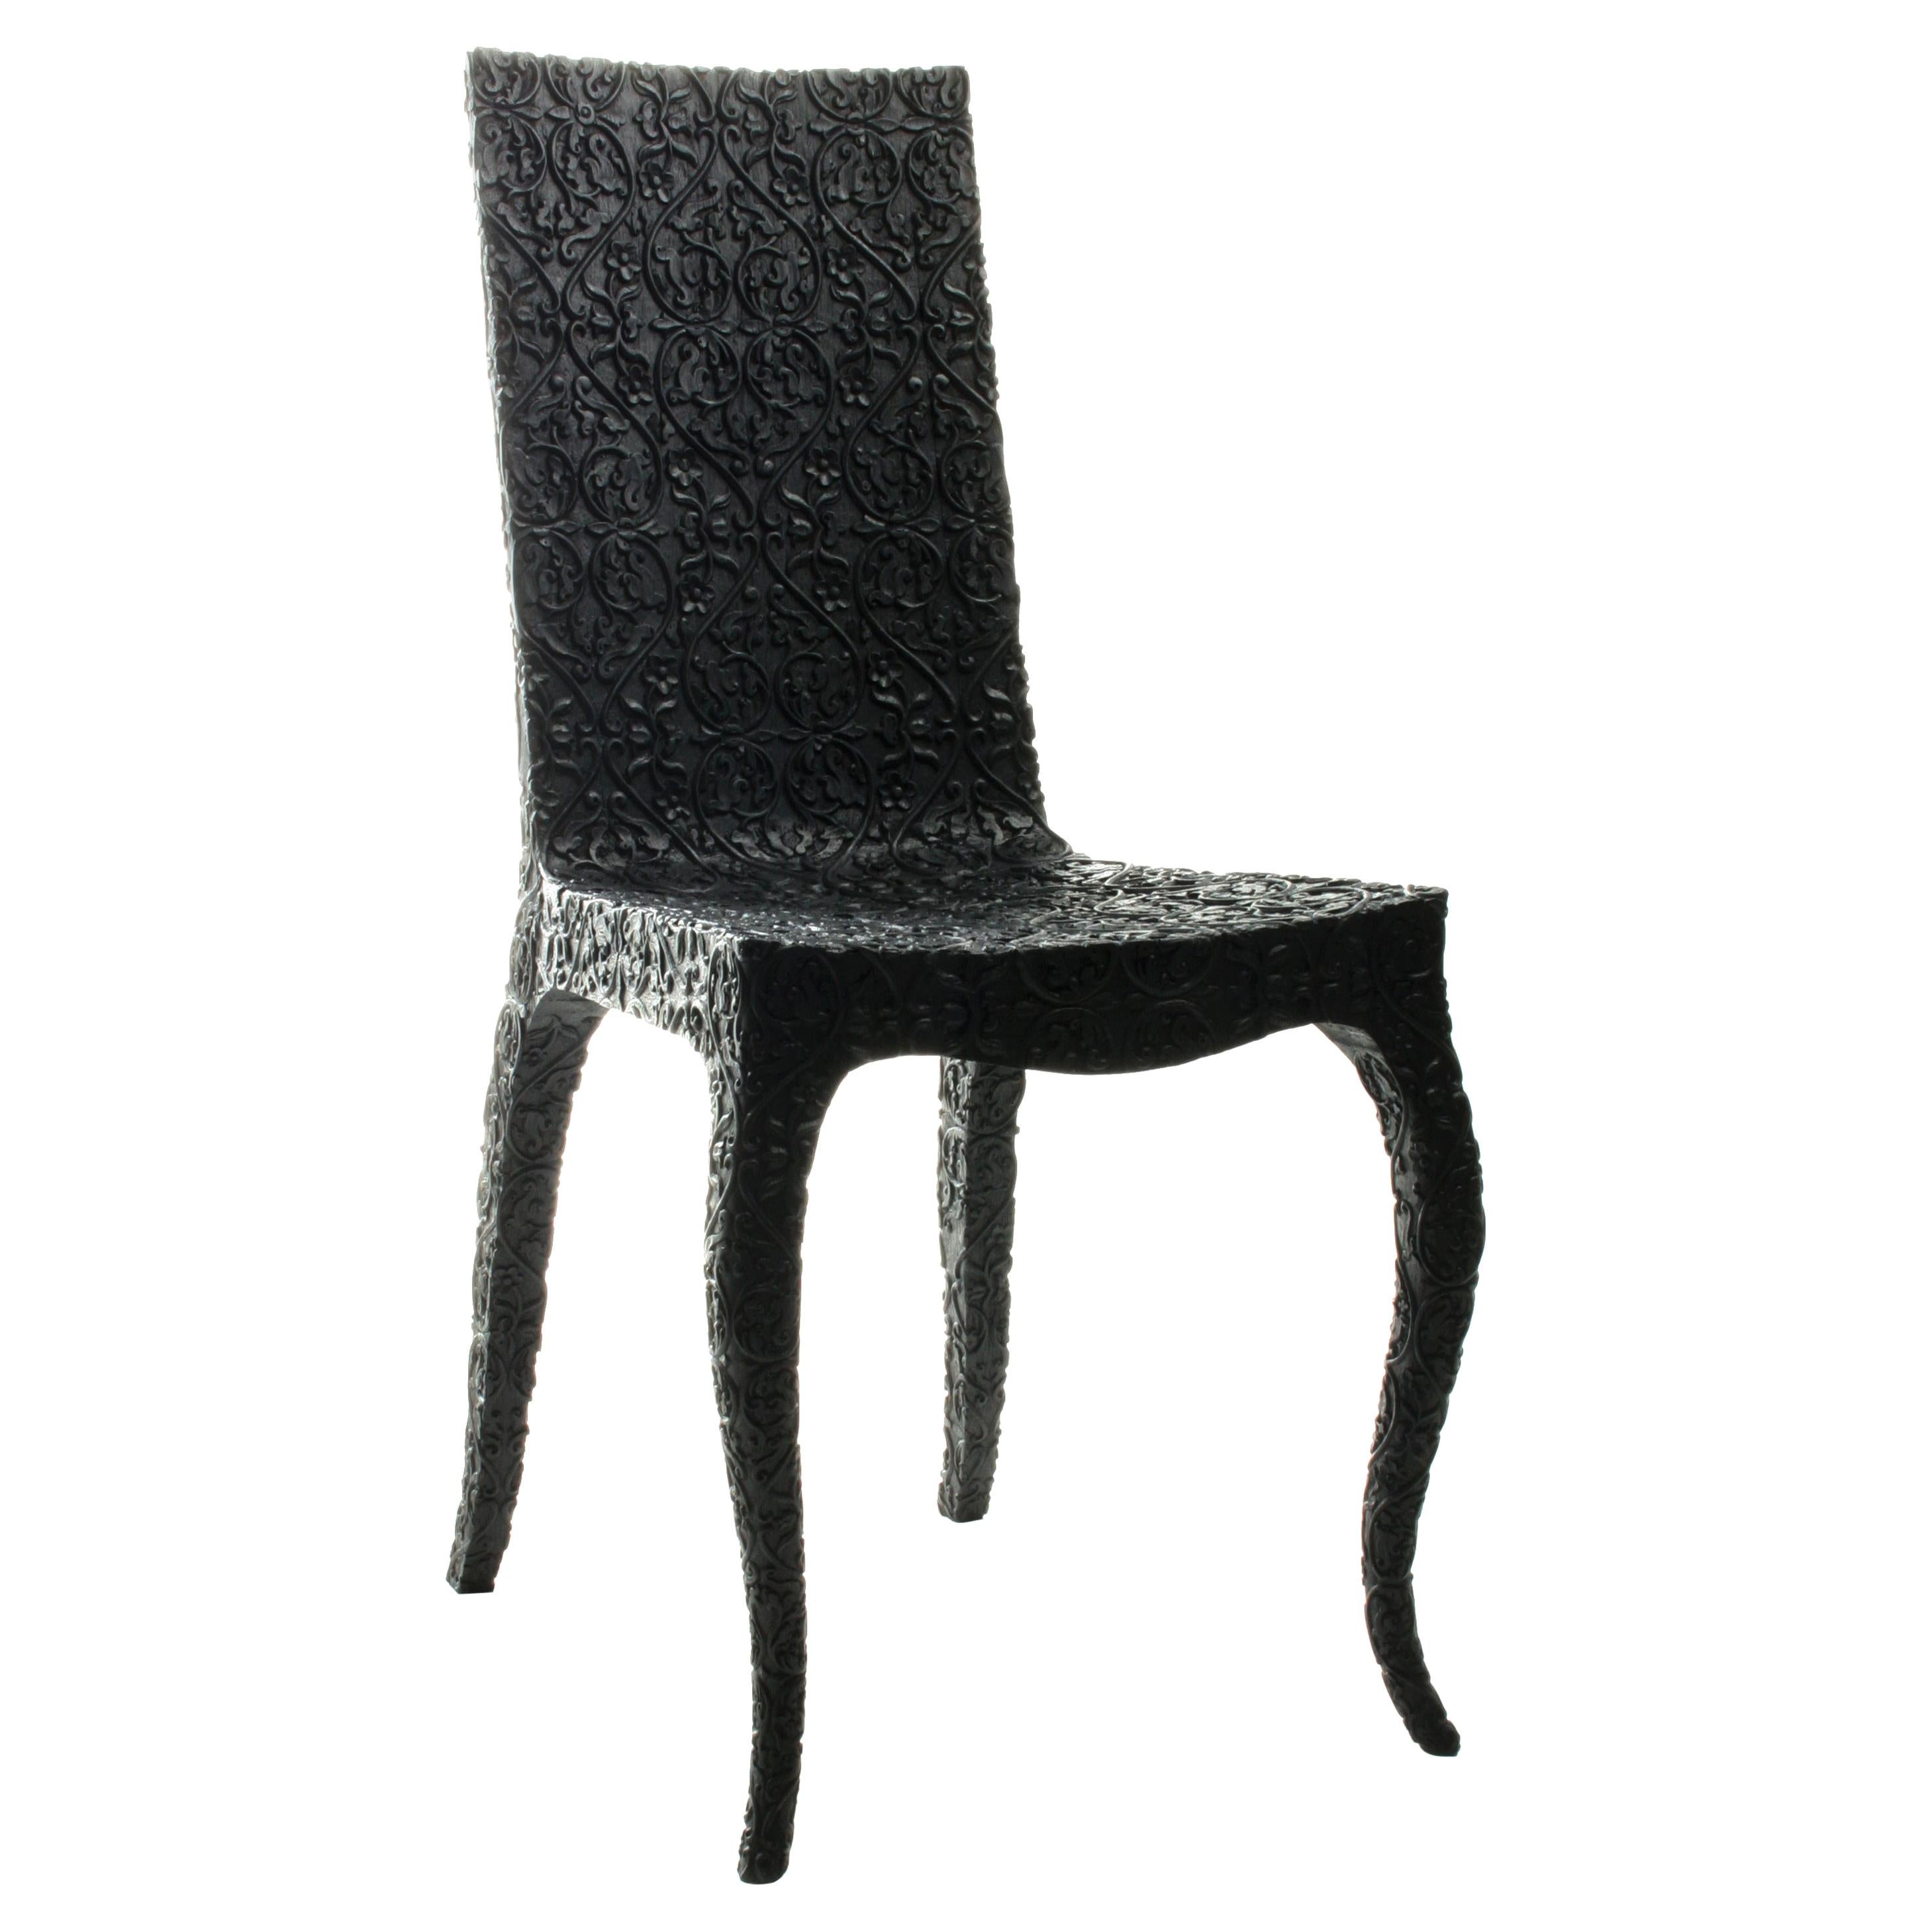 Carved Chair, by Marcel Wanders, Hand-Carved Chair, 2008, Black, Limited